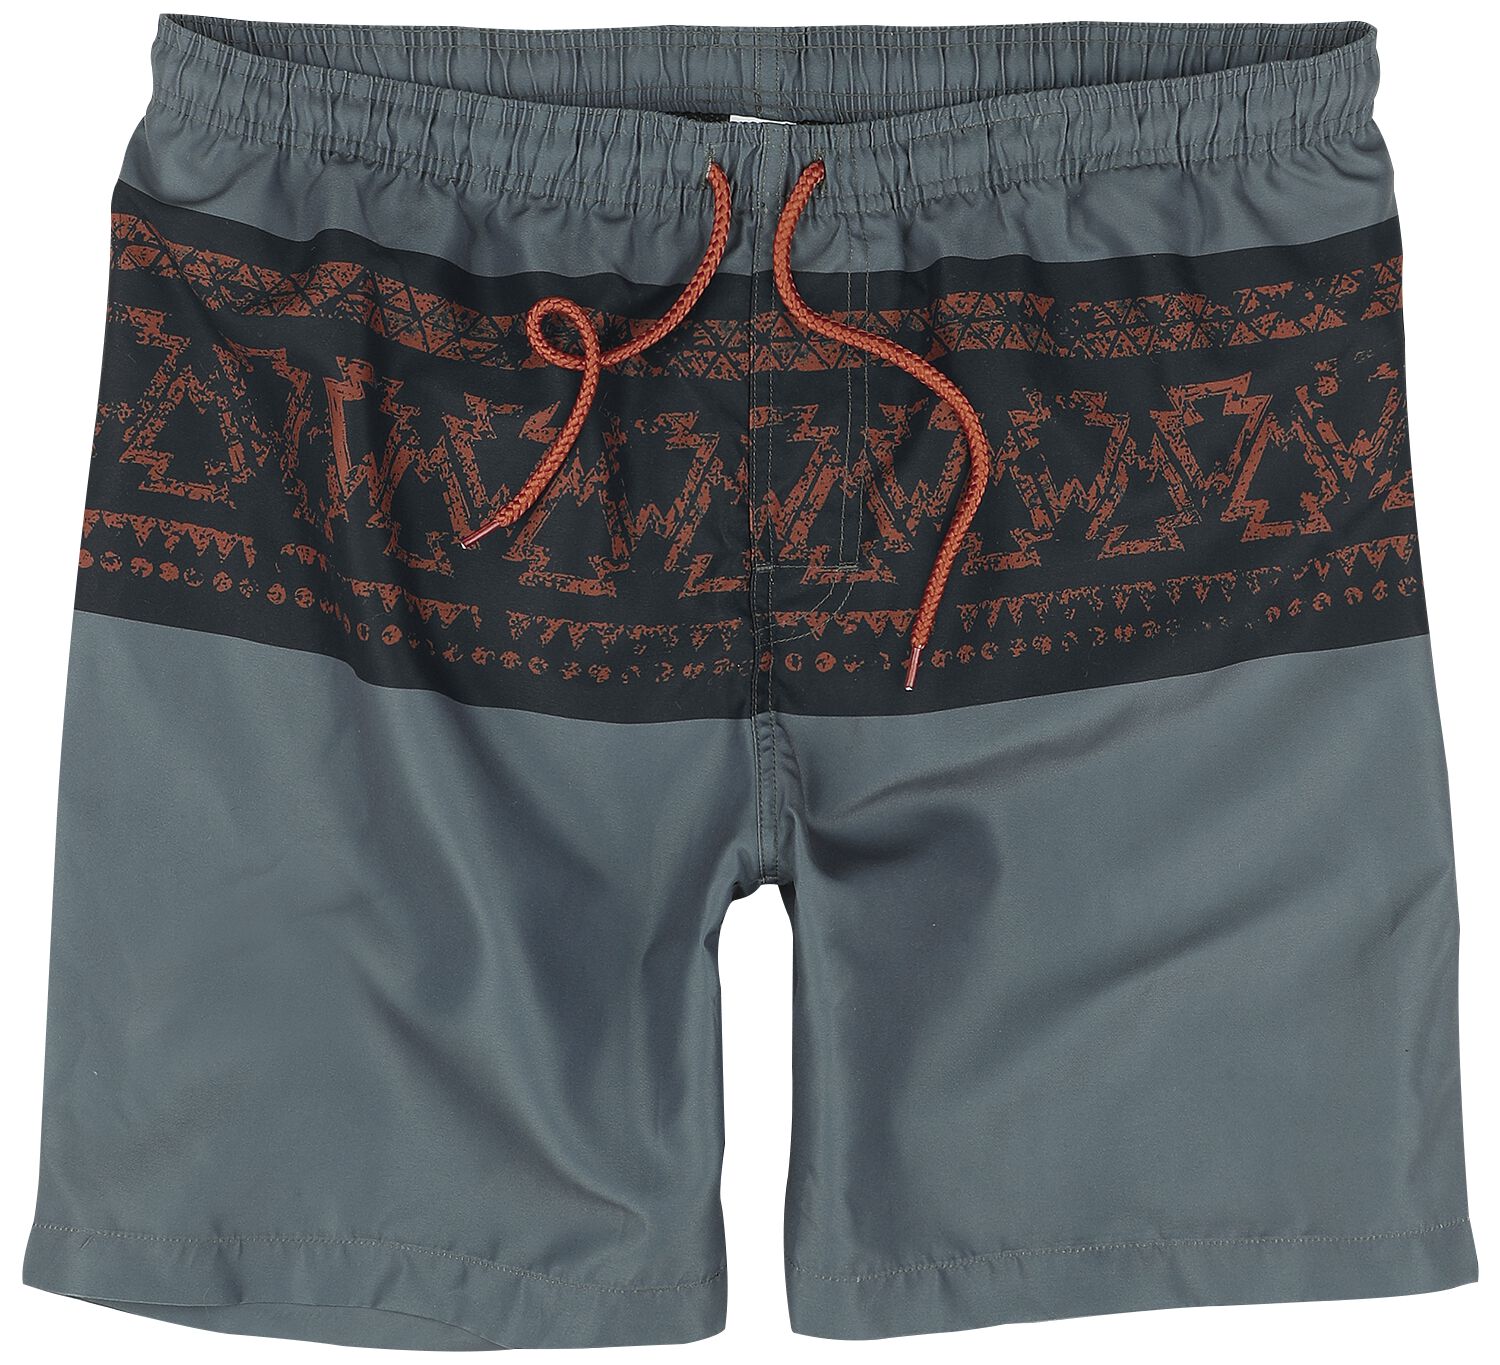 RED by EMP Swim Shorts With Graphic Design Badeshort dunkelgrau in XXL